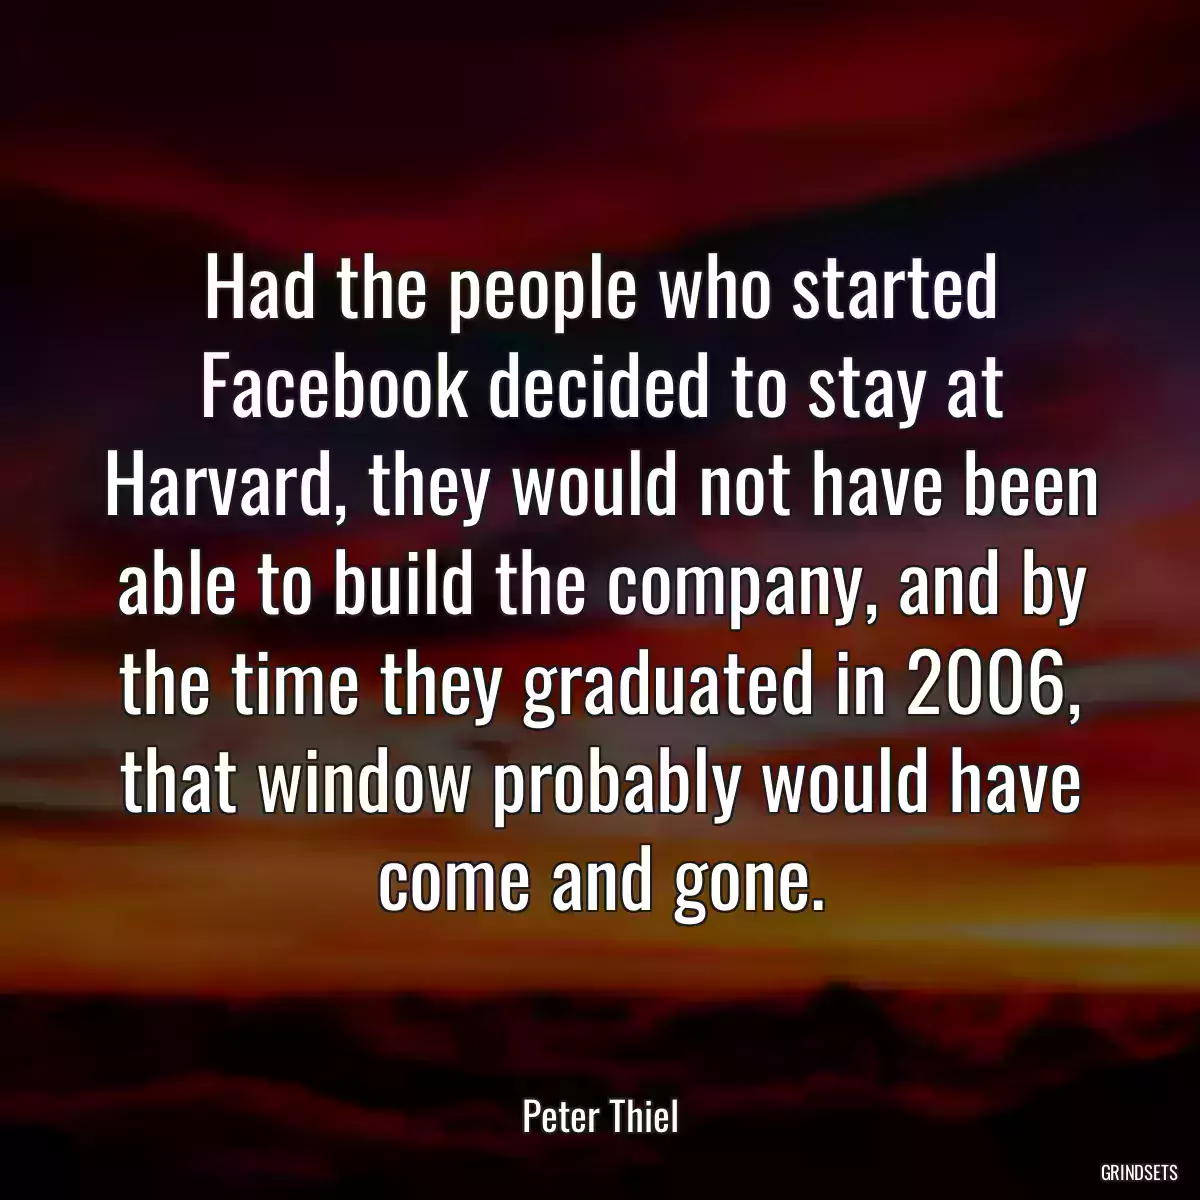 Had the people who started Facebook decided to stay at Harvard, they would not have been able to build the company, and by the time they graduated in 2006, that window probably would have come and gone.